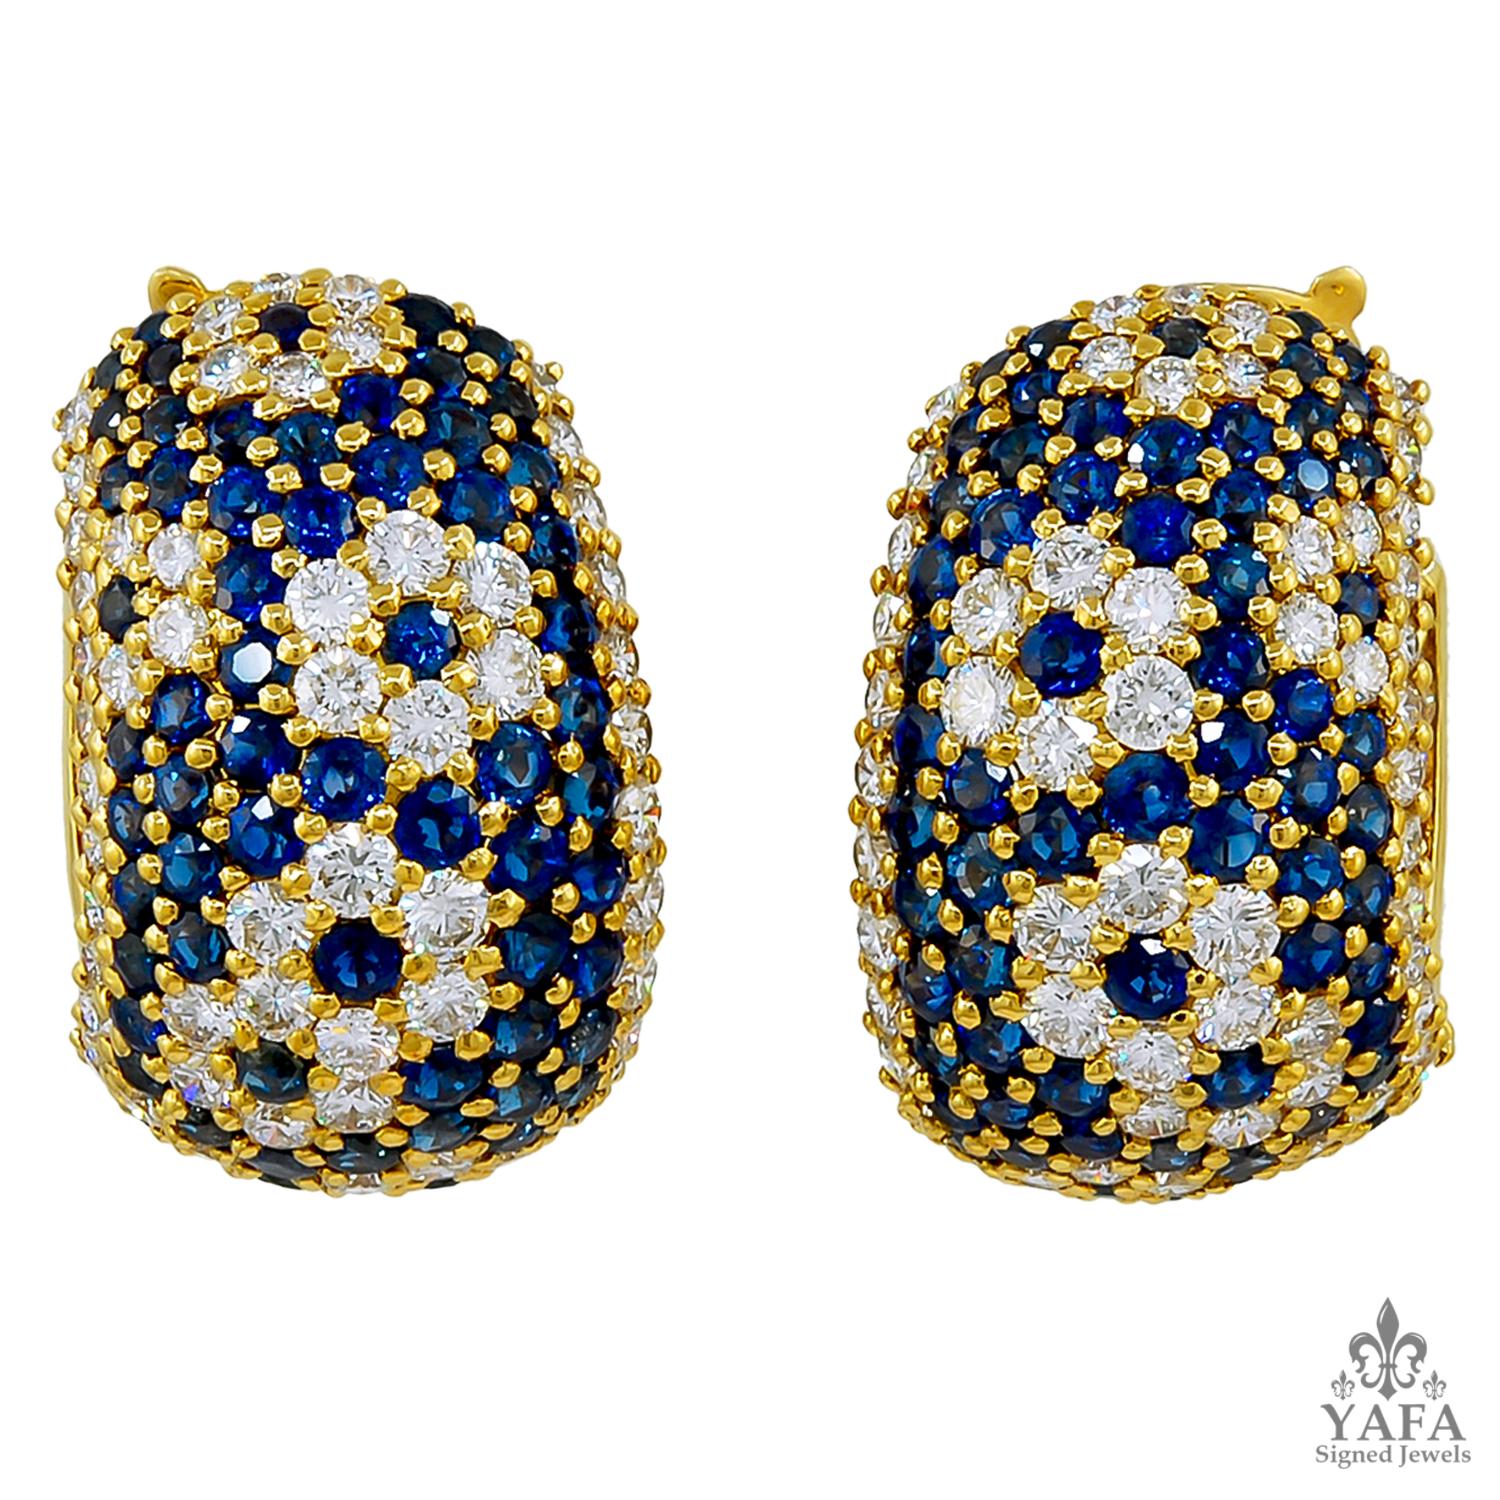 Van Cleef & Arpels Vintage Diamond Sapphire Gold Earrings
Chic wearable day to evening classic Van Cleef earrings
A pair of 18k yellow gold ear clips, set with circular-cut sapphires and diamonds, signed Van Cleef & Arpels, French.
dimensions